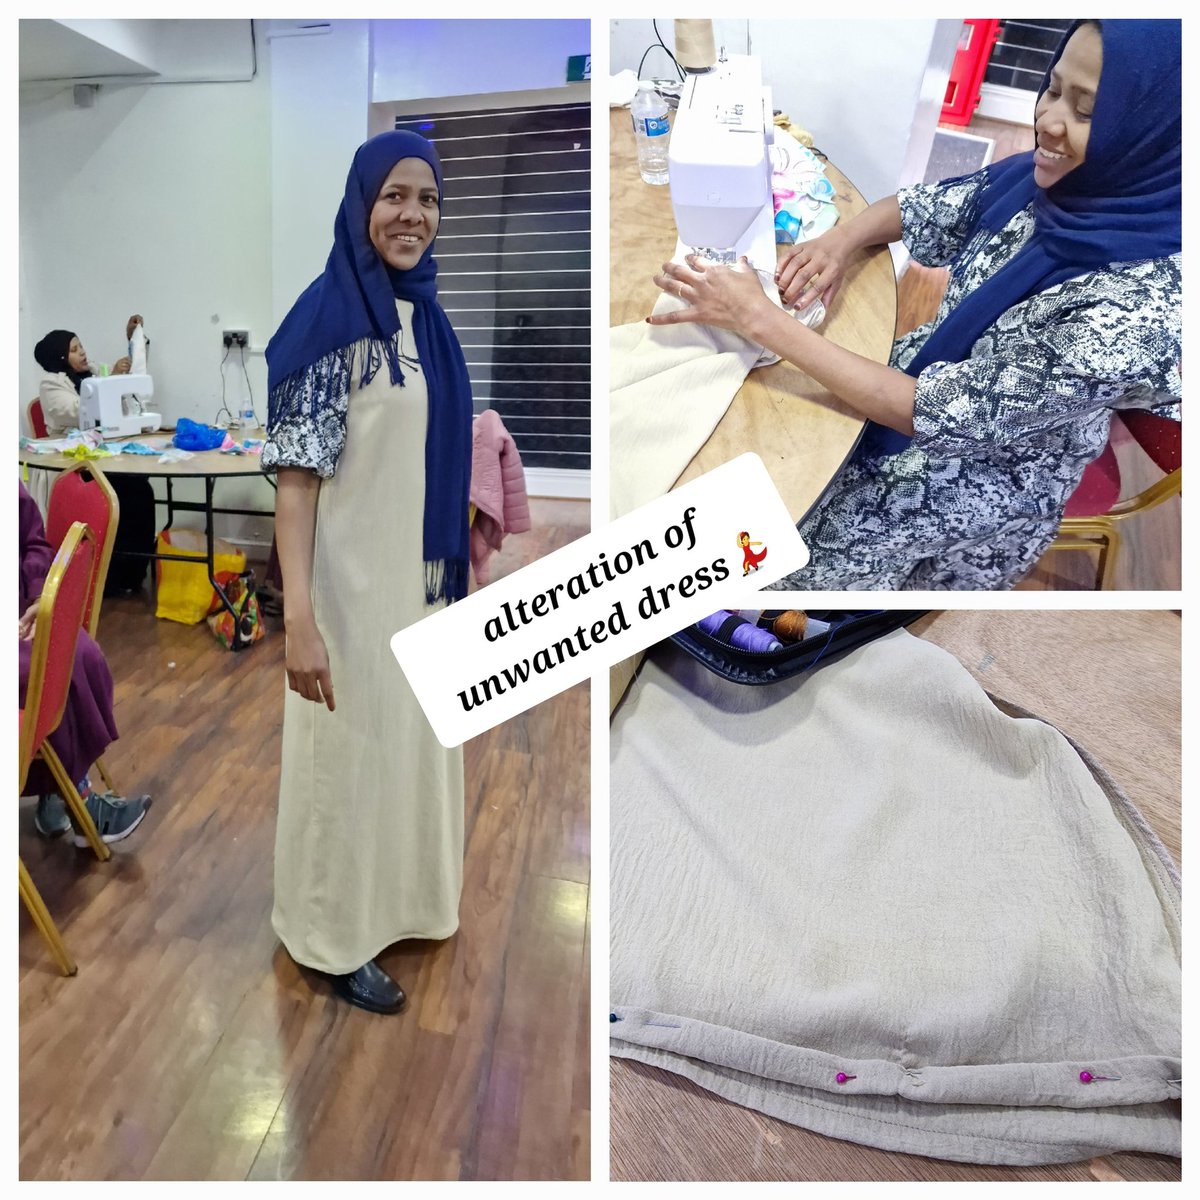 Today, at Connecting Steps, Manchester, the ladies have been doing a lot of #refashion and #alterations of unwanted dresses as well as #upcycling unwanted curtains/bedsheets to make shopping bags. #reuse #zerotextilewaste #saynotofastfashion #sustainablefashion #skills #wellbeing